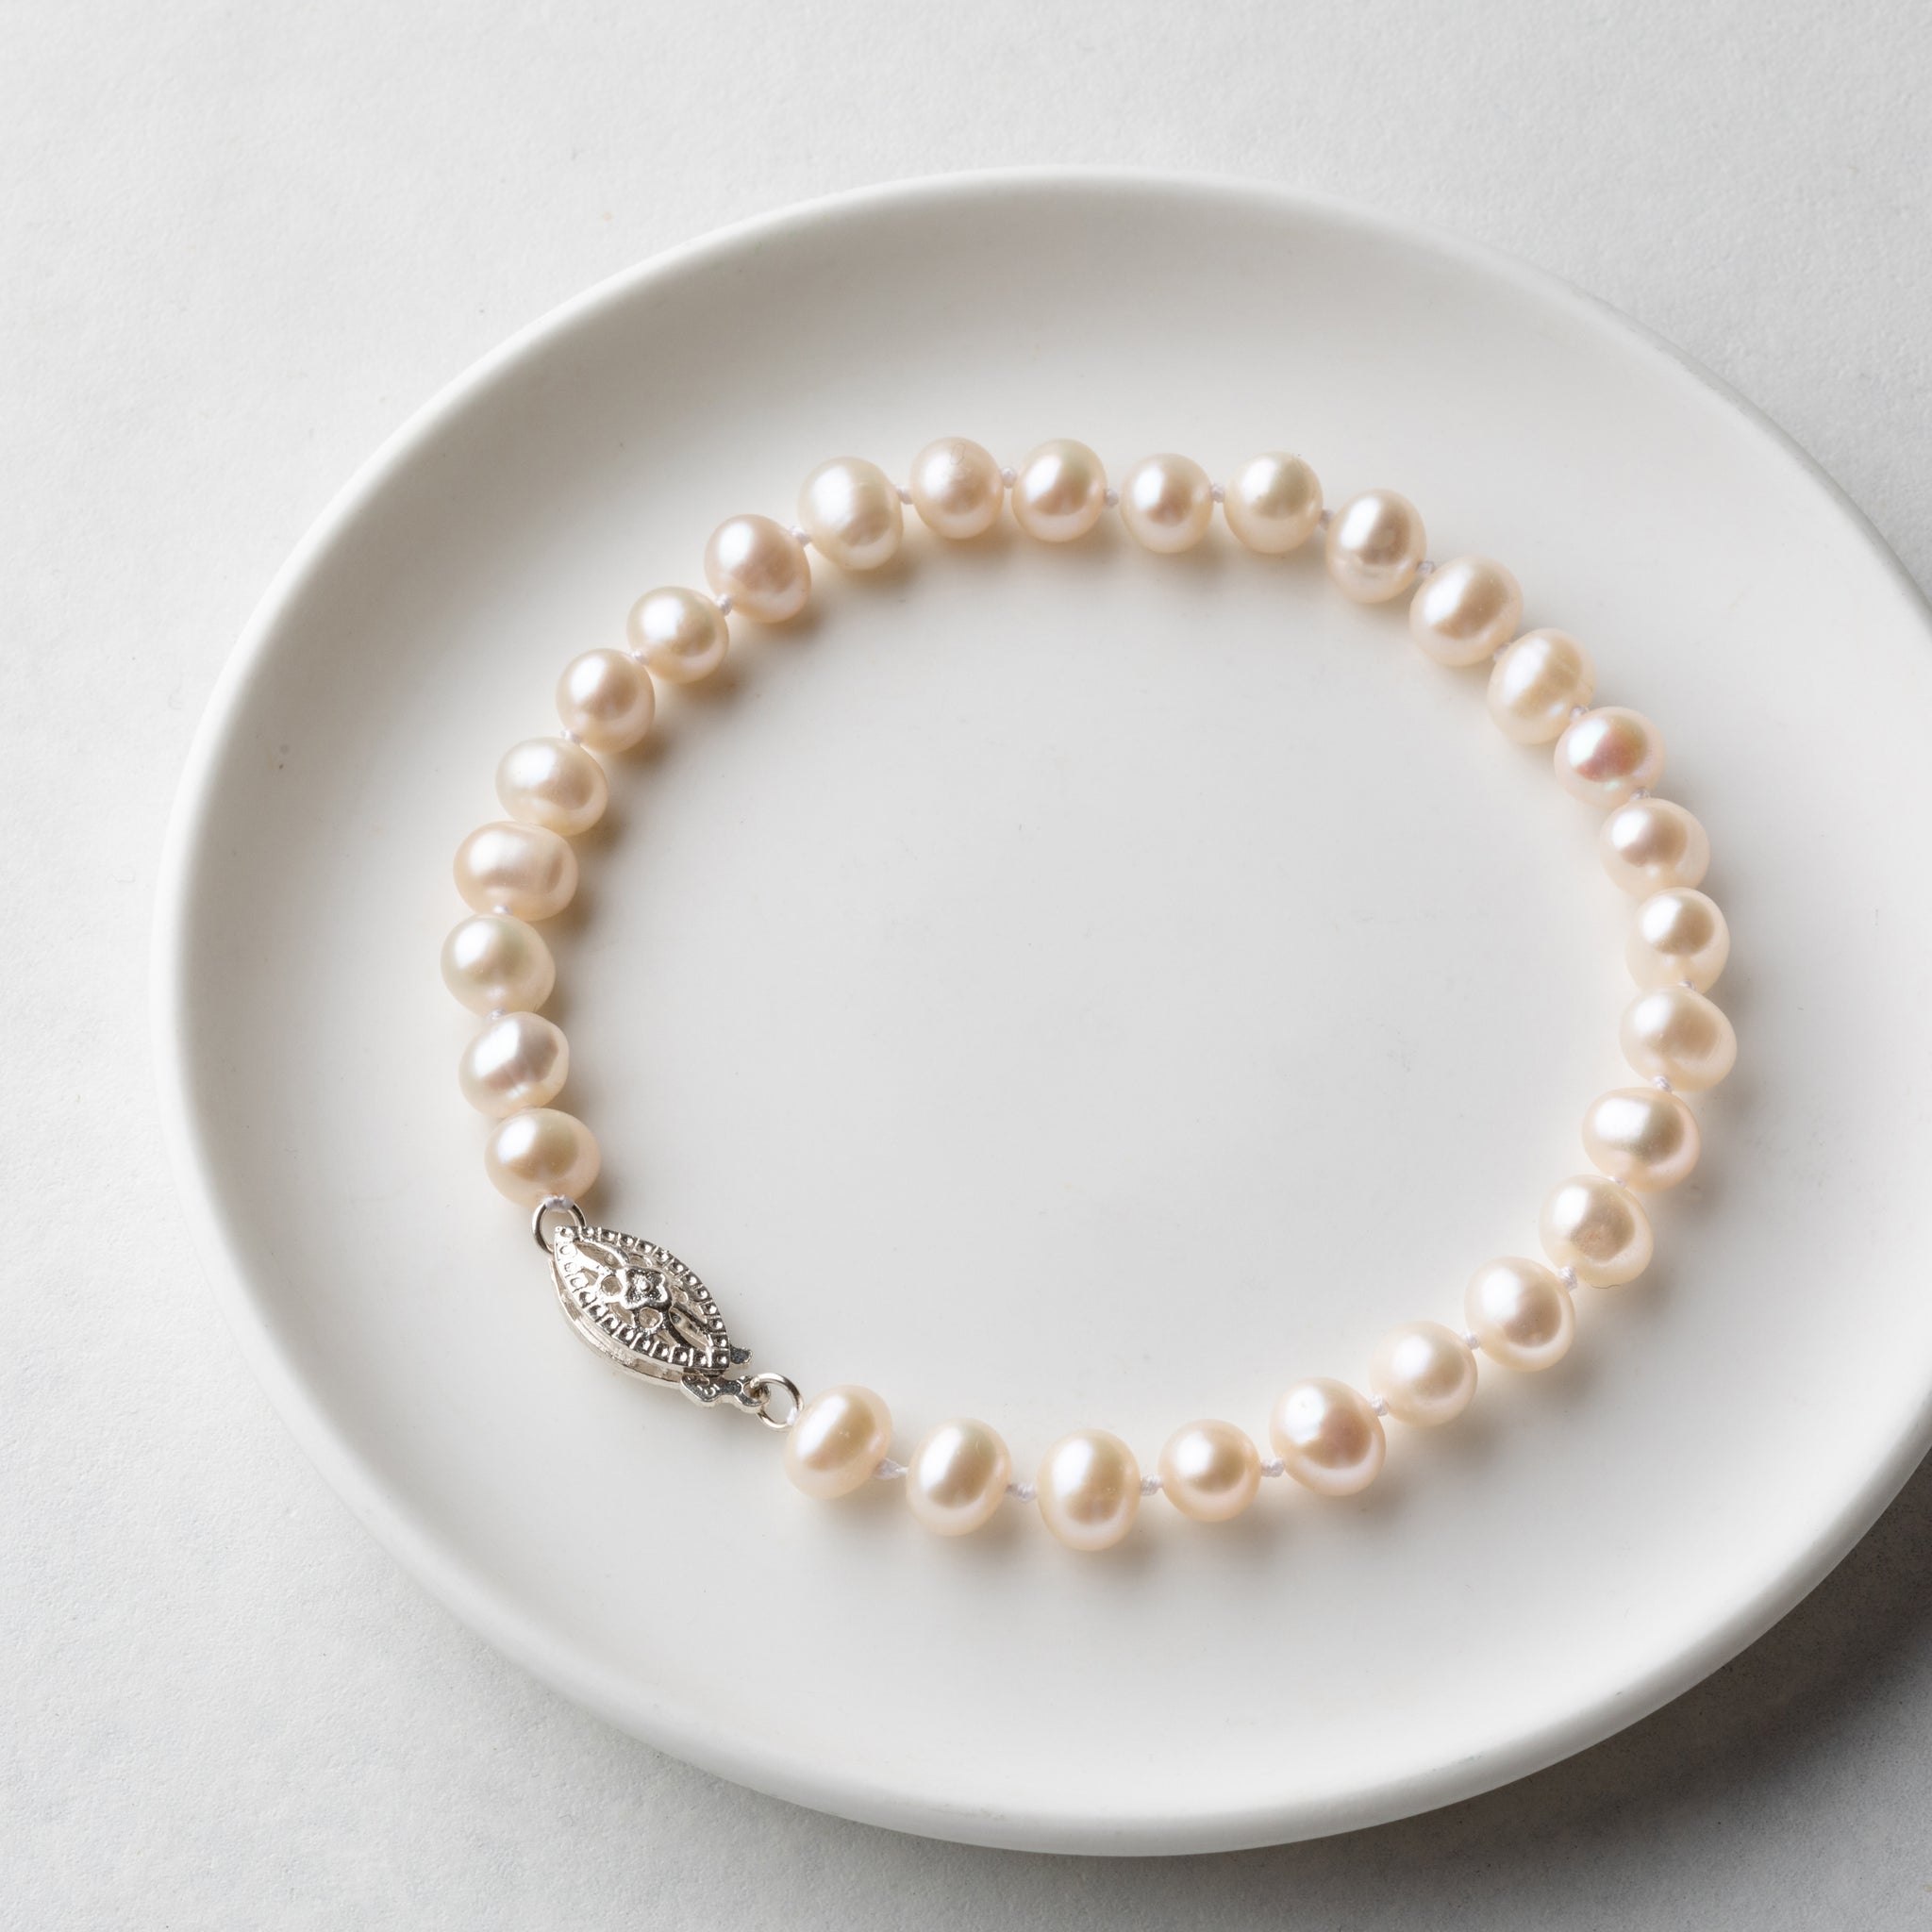 Sold at Auction: A South Sea Pearl Necklace w/ 14ct Gold Ball Clasp